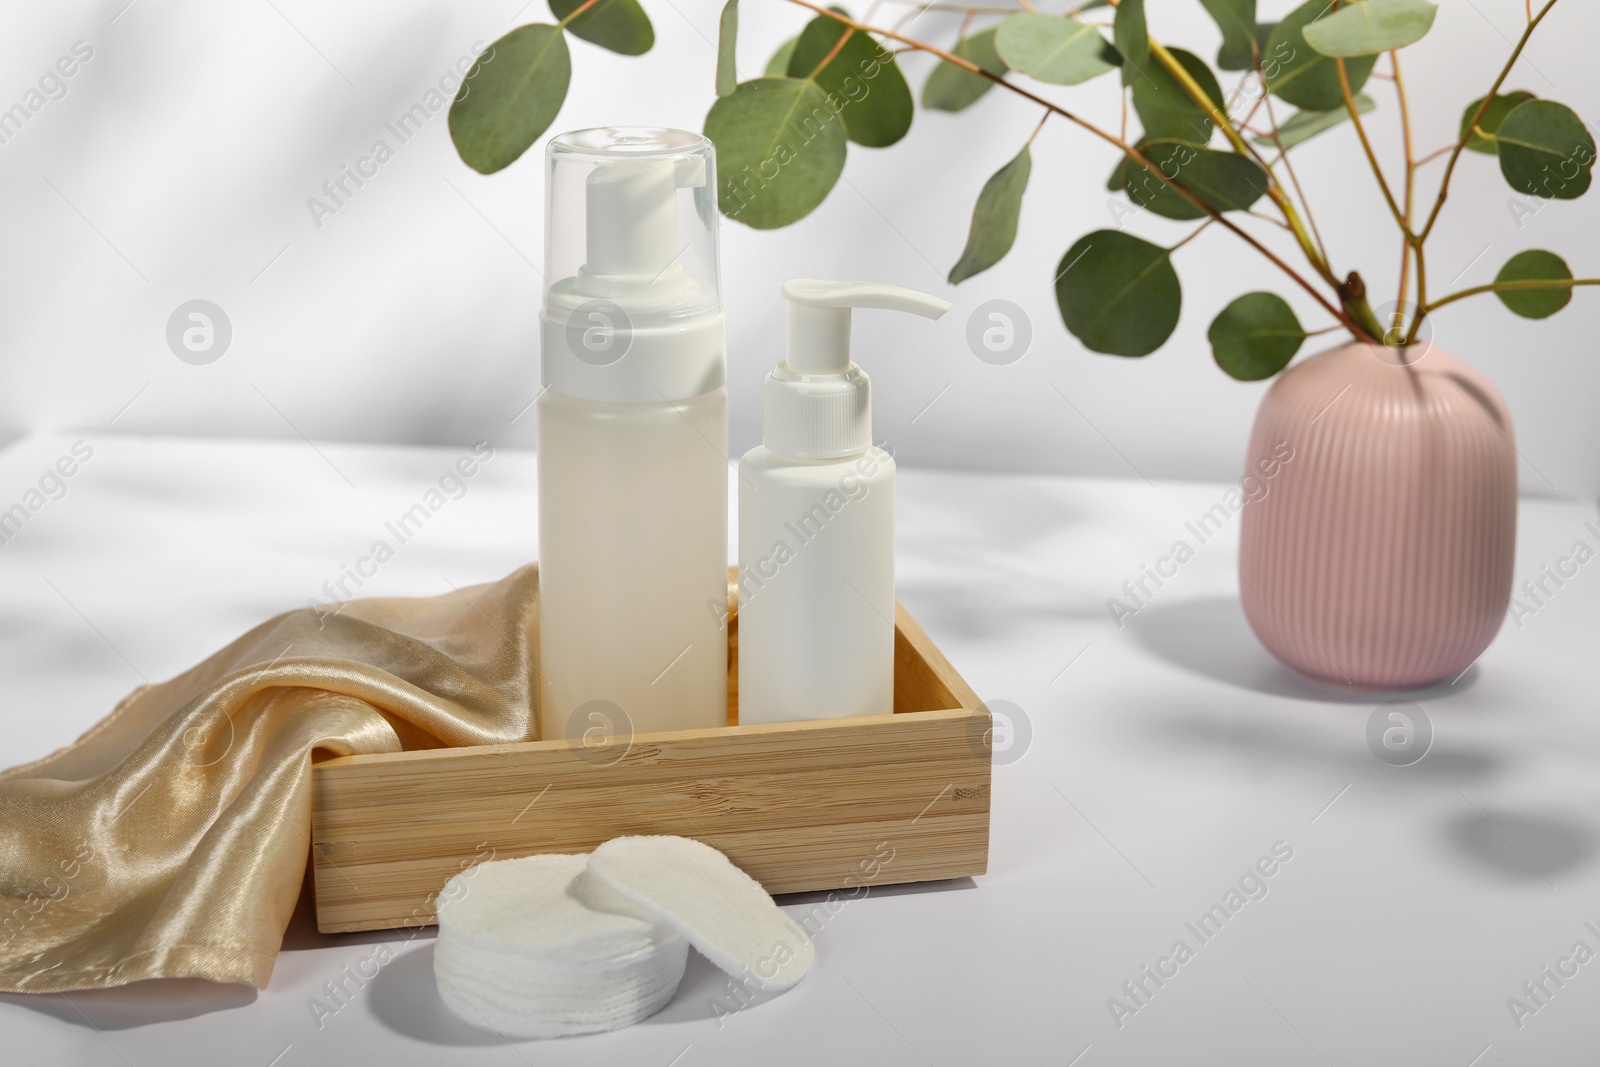 Photo of Bottles of face cleansing products, cotton pads and eucalyptus branches on white table